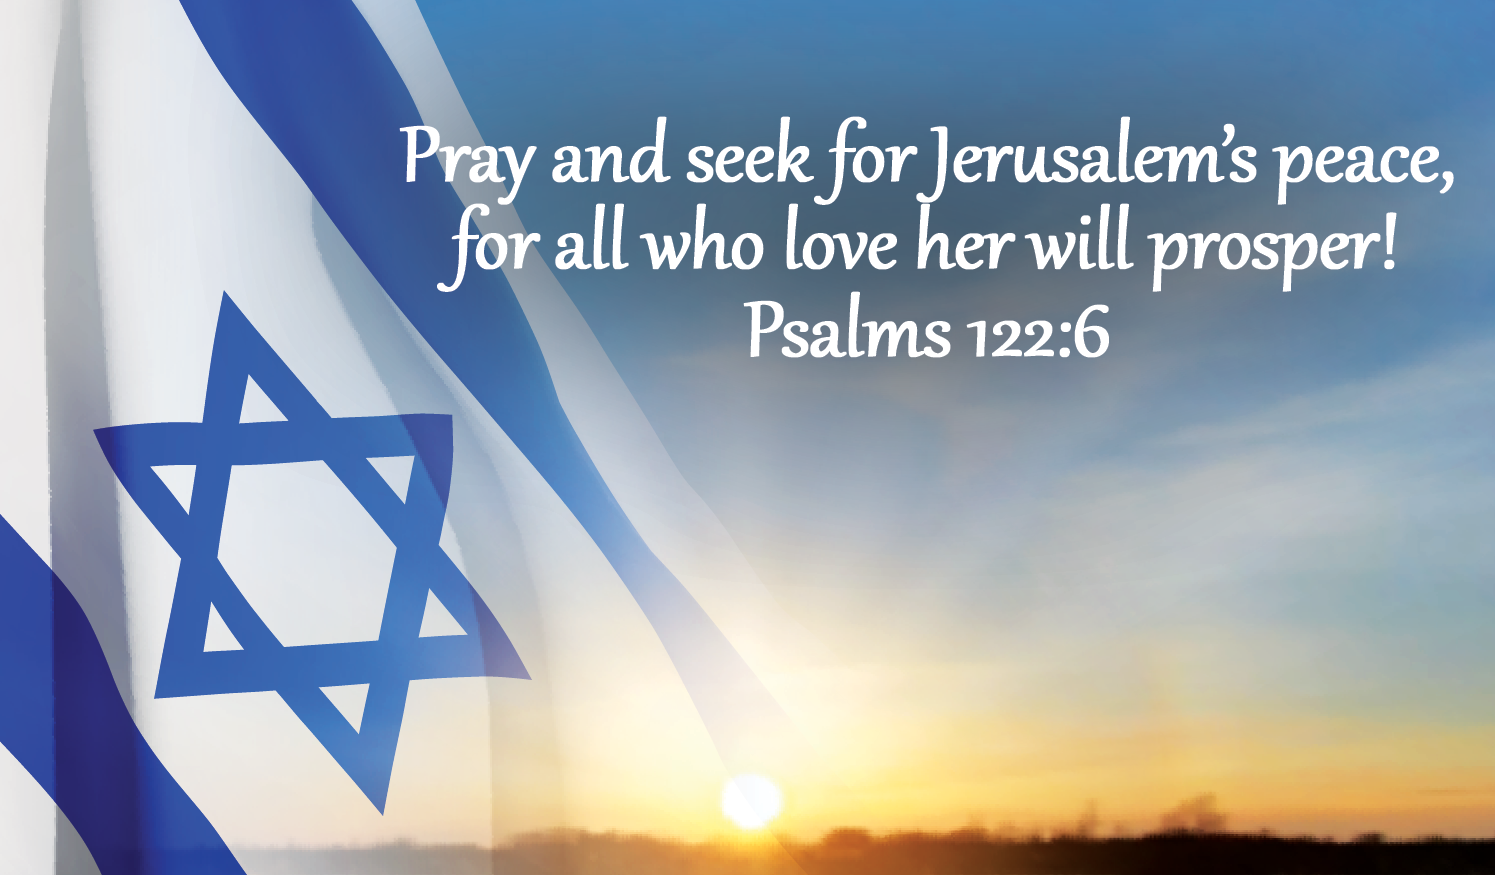 Pray and seek for Jerusalem’s peace,
for all who love her will prosper!
Psalms 122:6